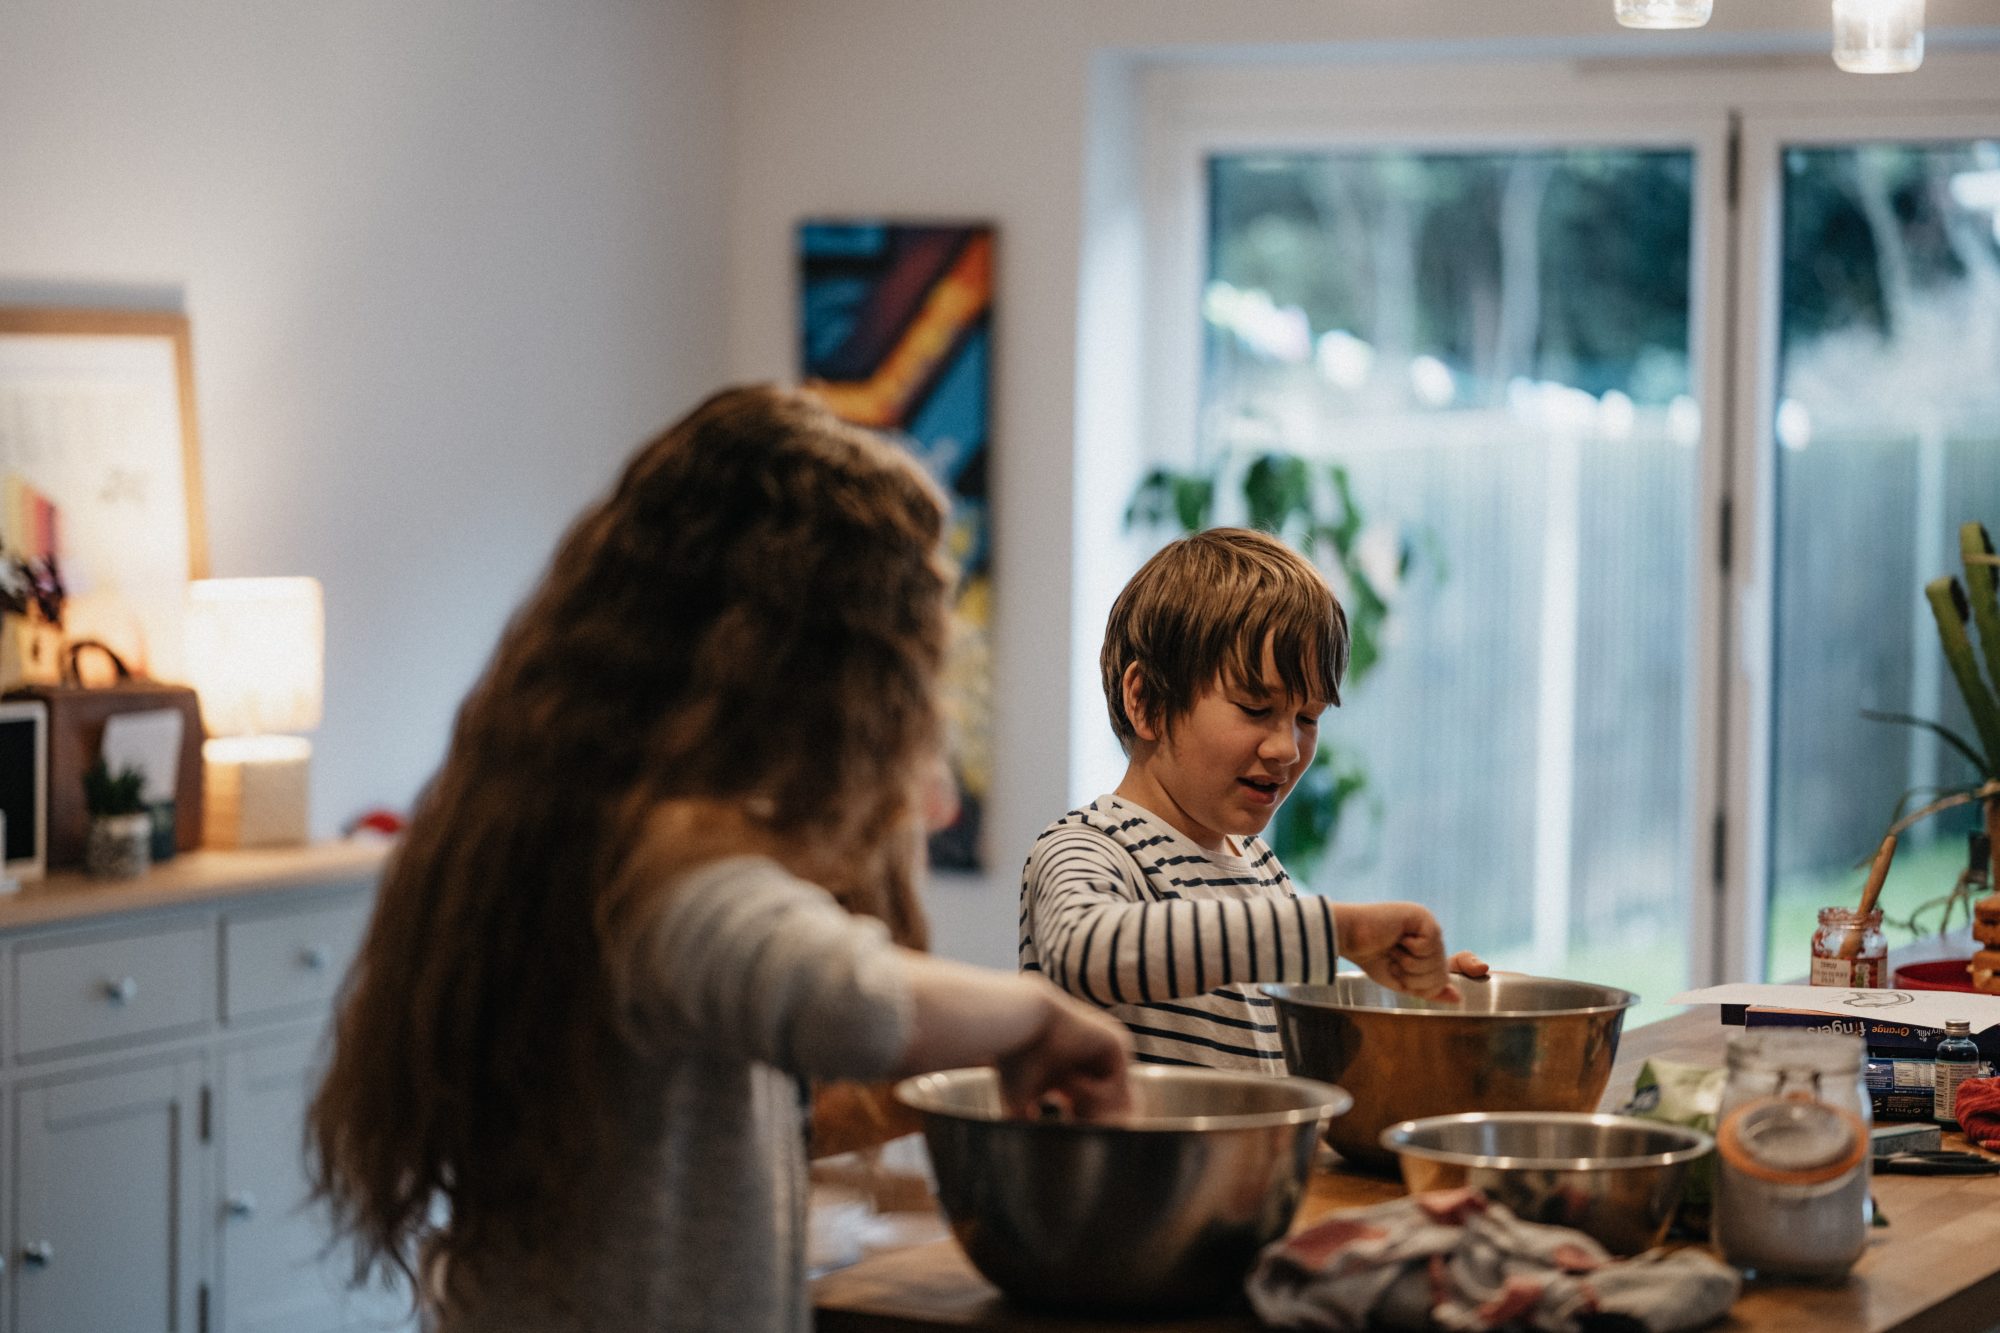 Two children, a boy and a girl, are stood in a light, airy kitchen at a wood work surface. They are each putting ingredients into steel mixing bowls. Other ingredients, books and bowls stand on the counter.They are baking their favourite treats to help them manage ADHD meds weight loss.